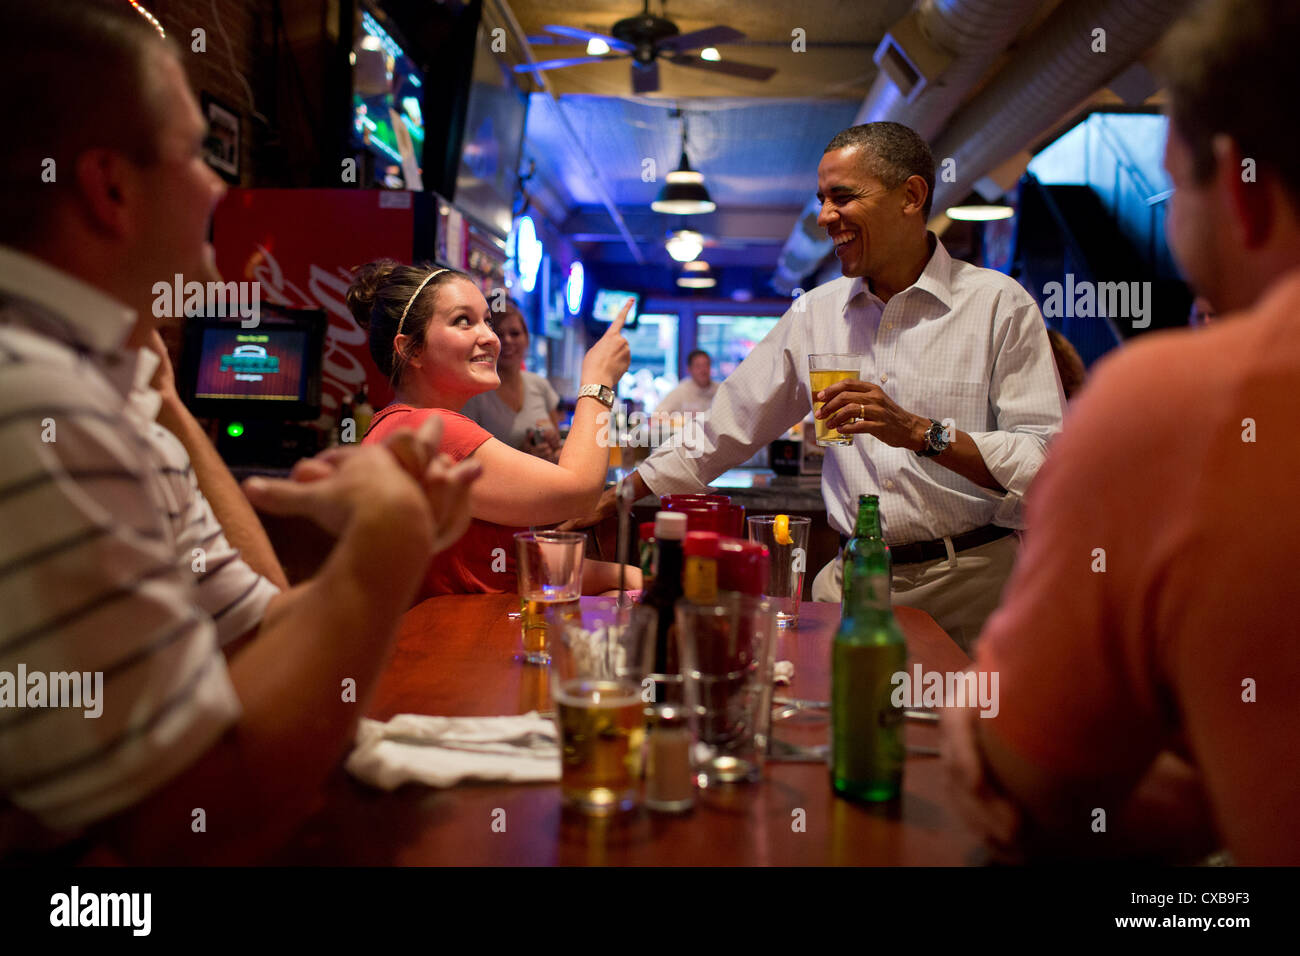 US President Barack Obama has a beer with patrons at the Pump Haus Pub and Grill August 14, 2012 in Waterloo, Iowa. Stock Photo